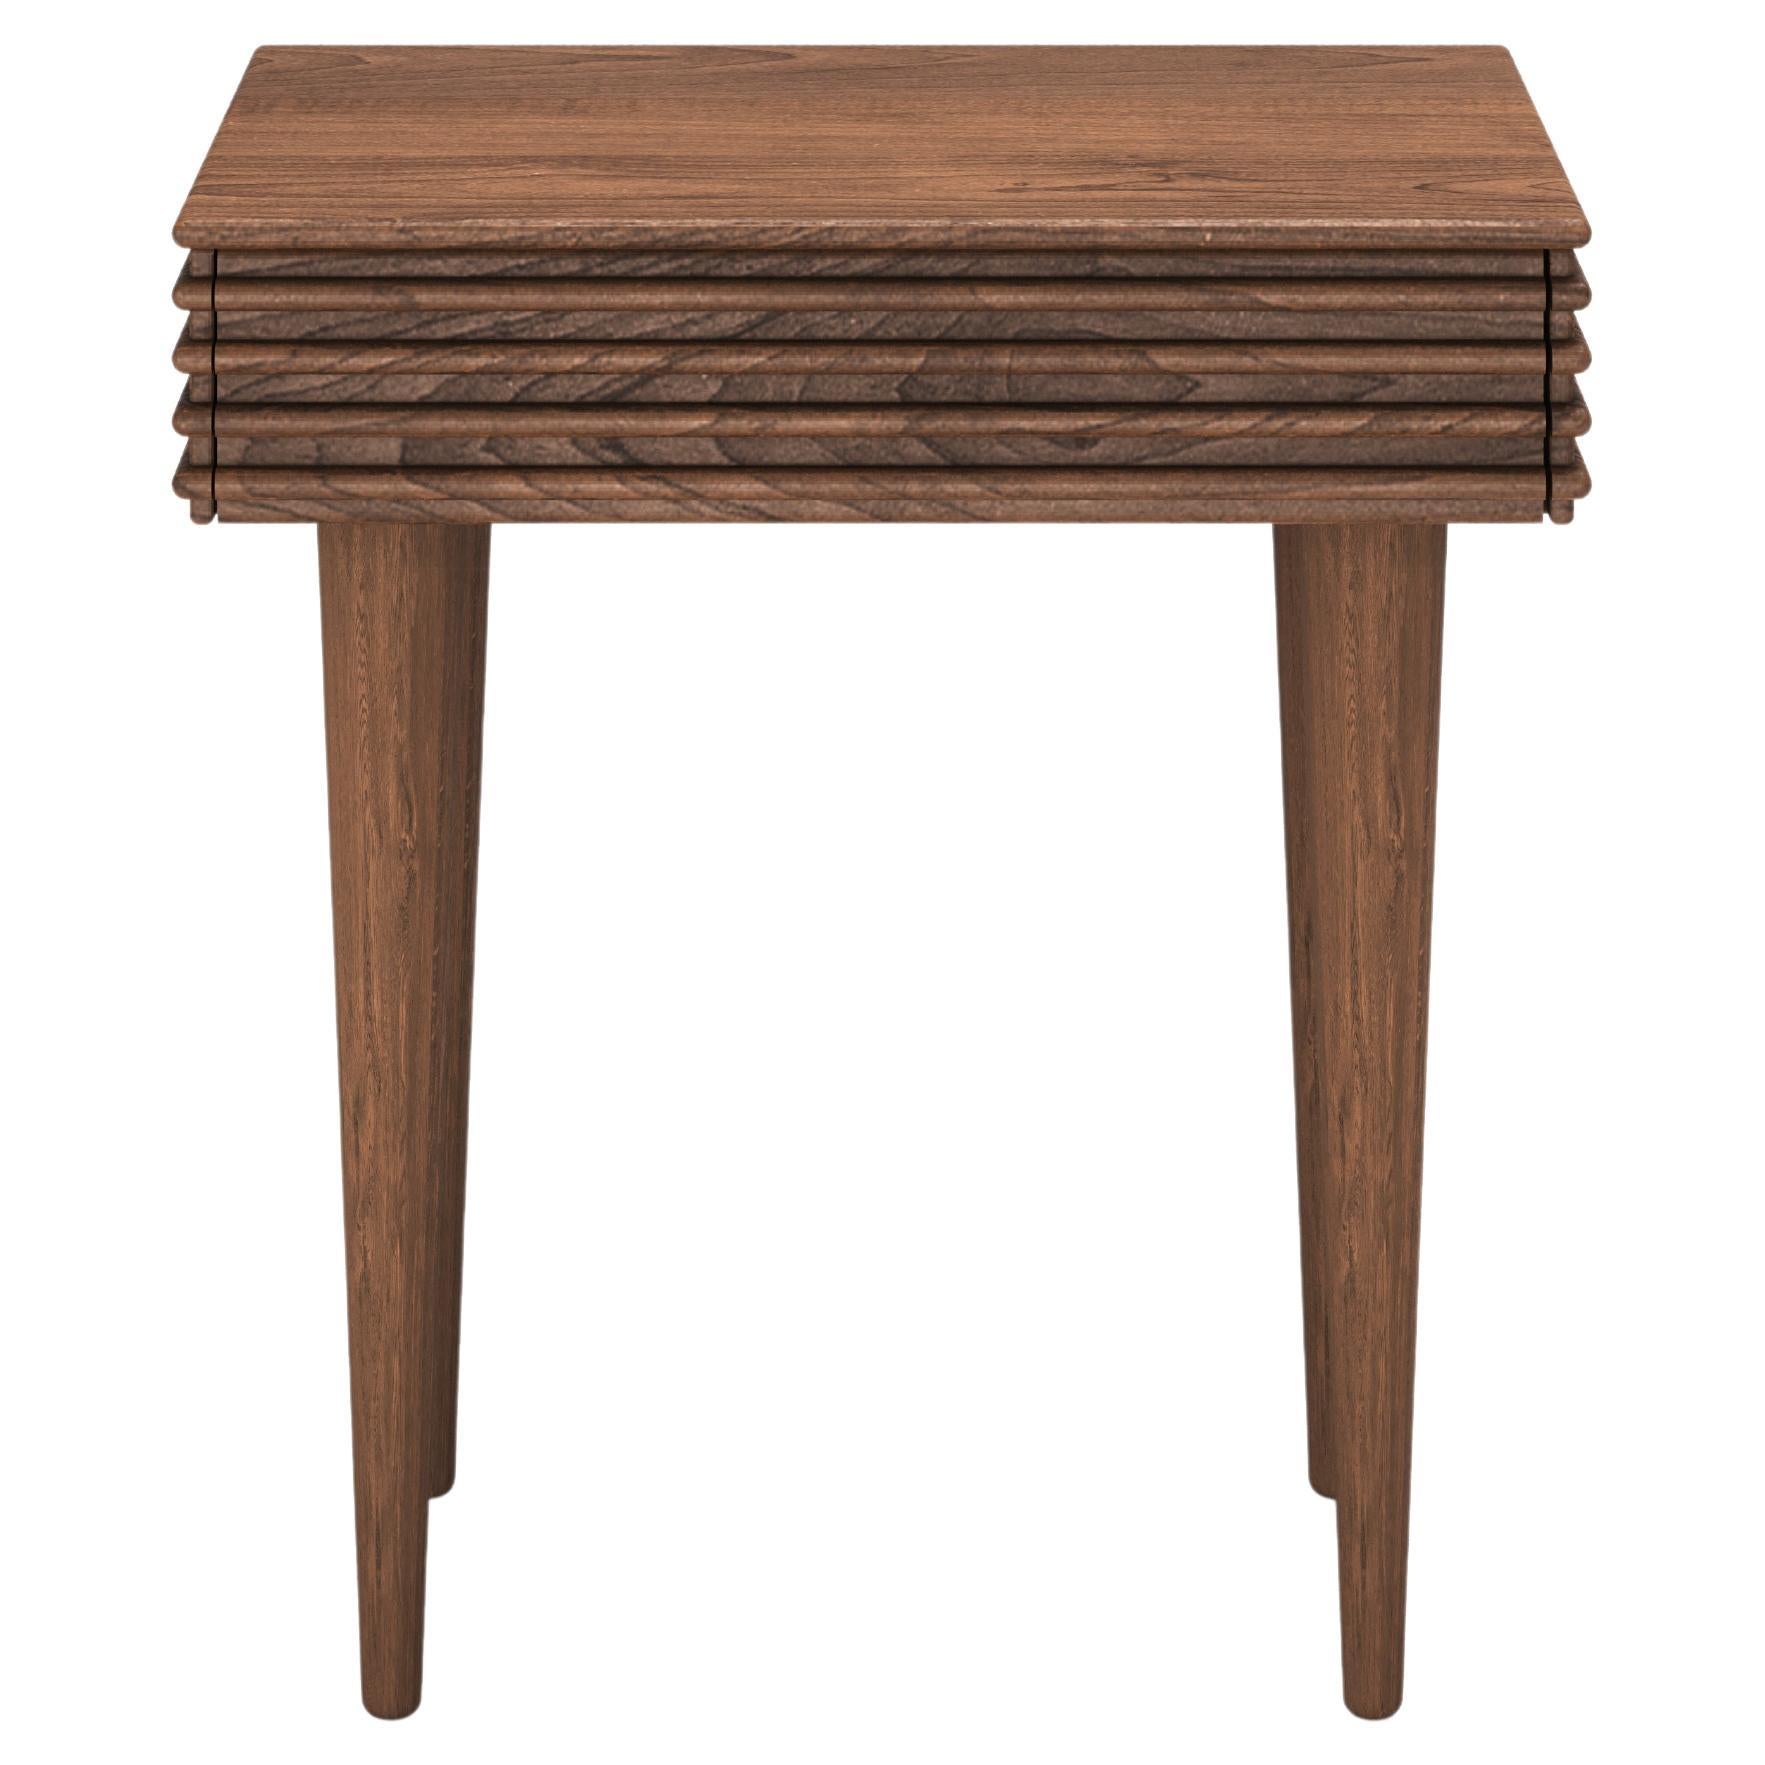 Contemporary Night Table 'Groove' by DK3, Walnut, M 42.5 cm, More Wood Finishes For Sale